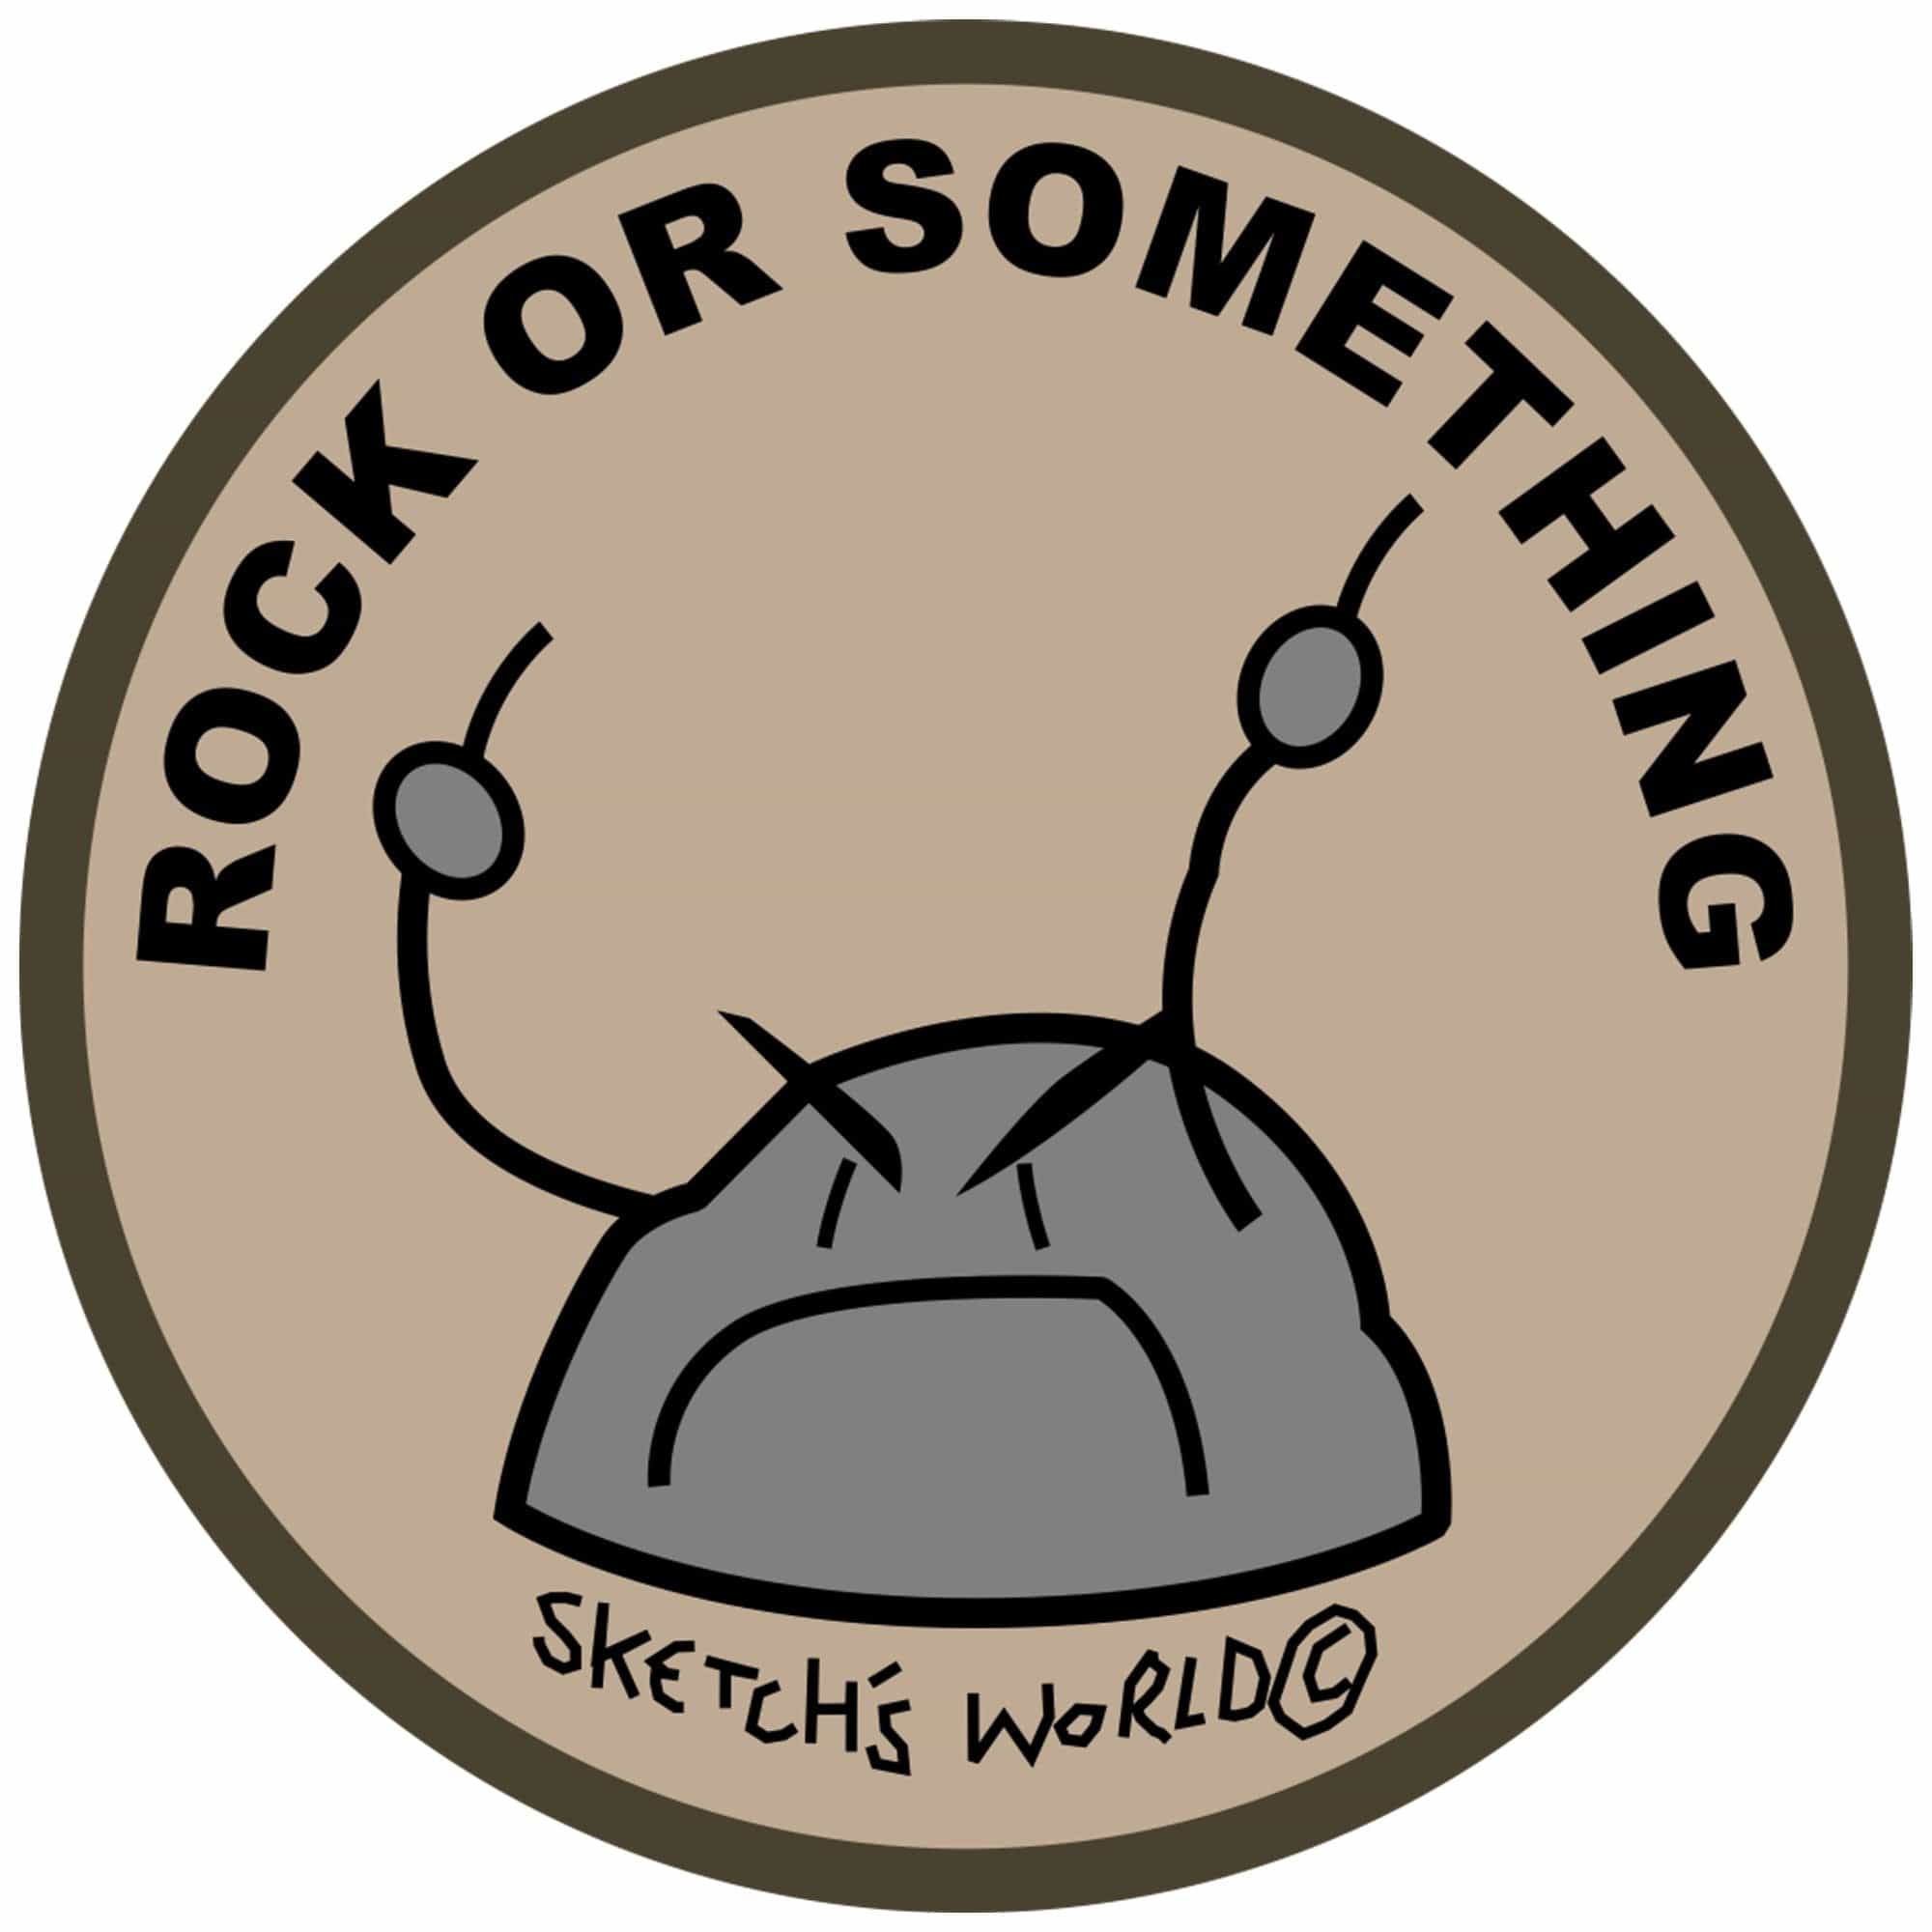 Or　Licensed　Rock　©　World　Inch　St　Something　Officially　Sketch's　3.5